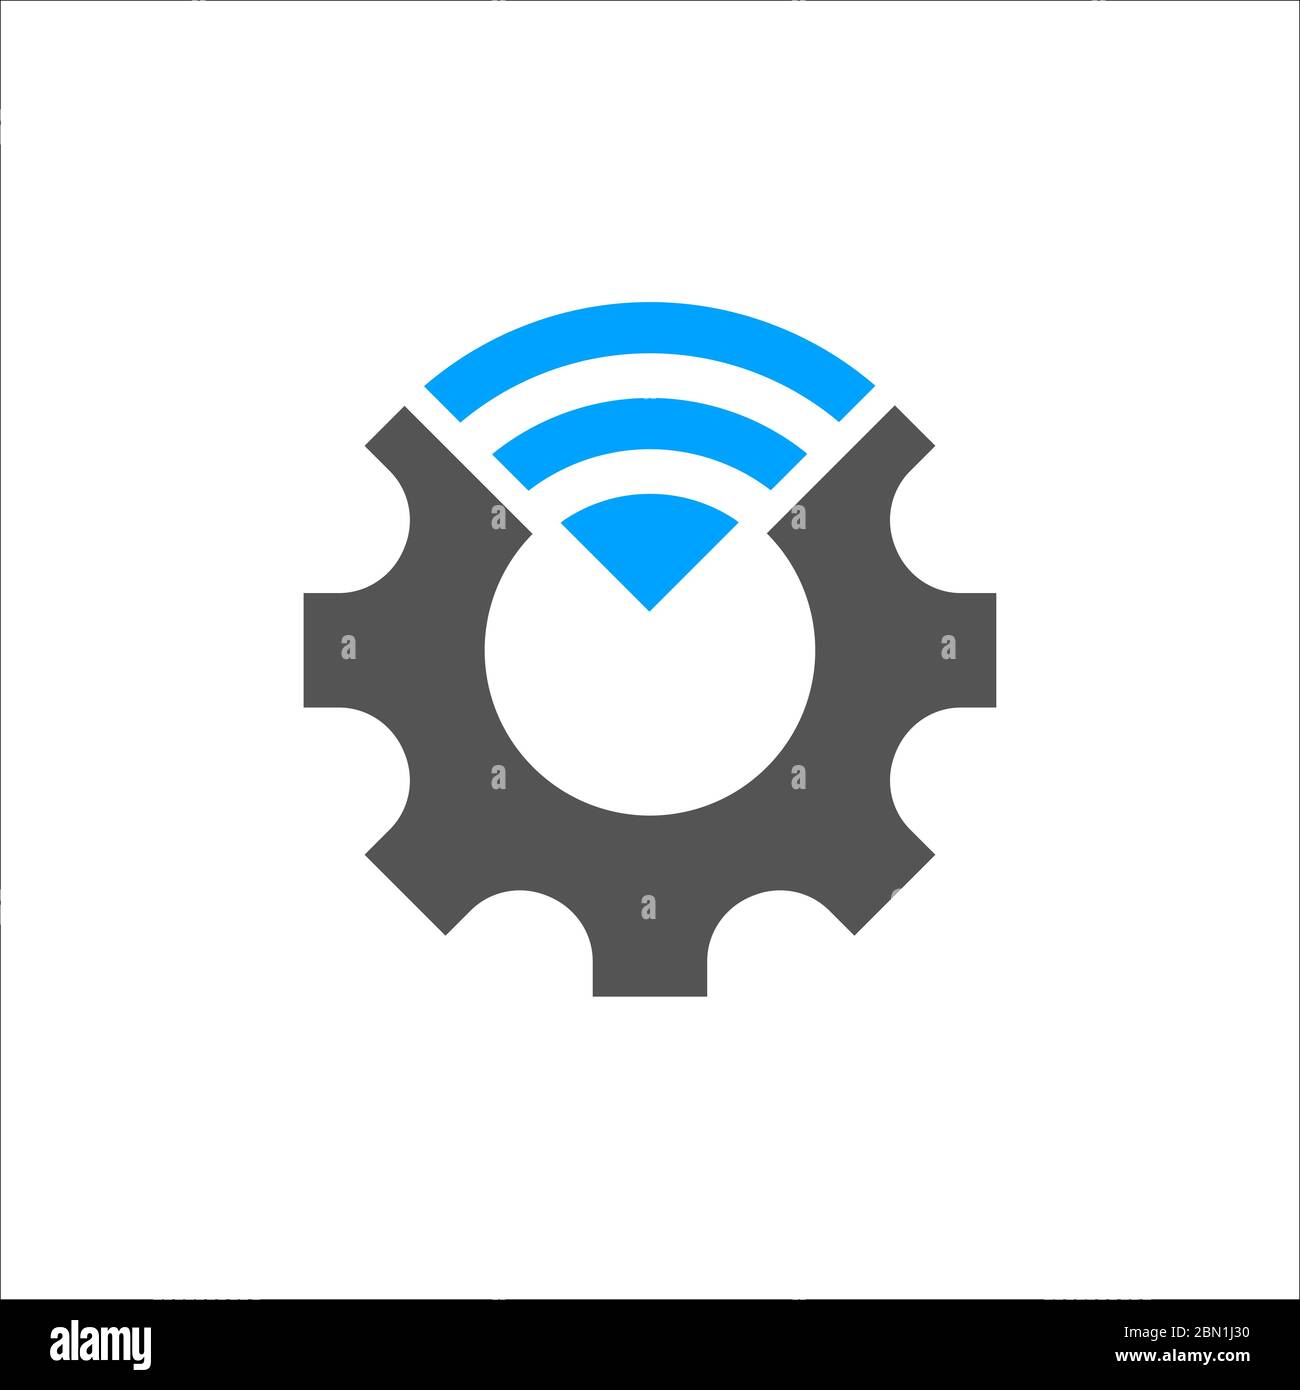 Industry 4.0 vector illustration. Cogwheel and blue conection icon. Manufacturing technology revolution with digital system. EPS 10 Stock Vector